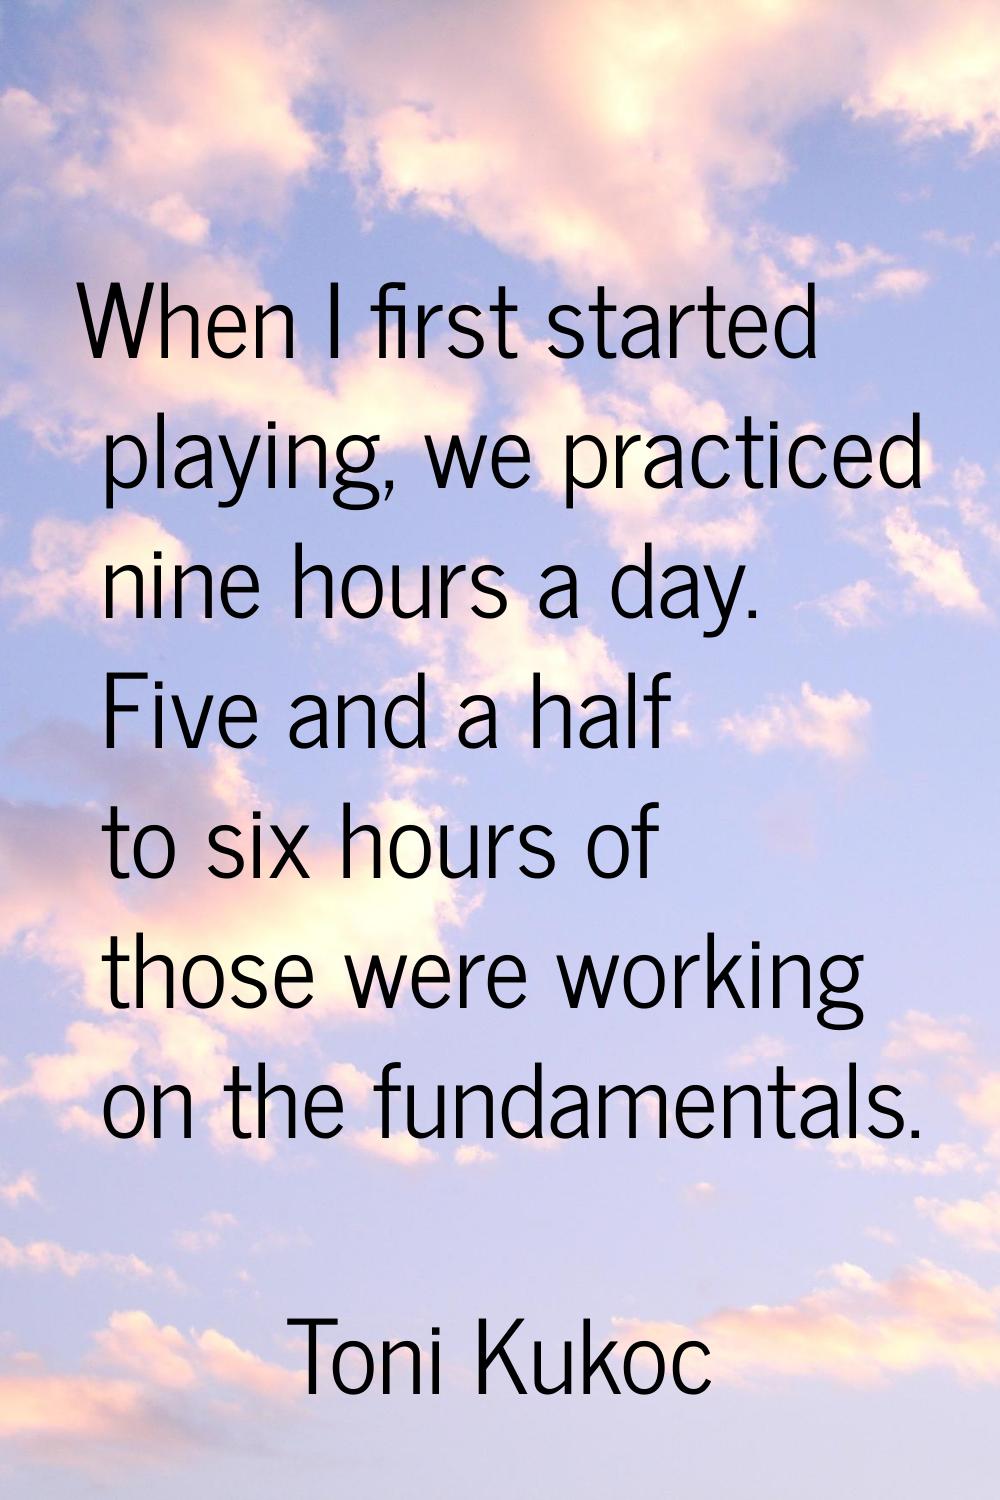 When I first started playing, we practiced nine hours a day. Five and a half to six hours of those 